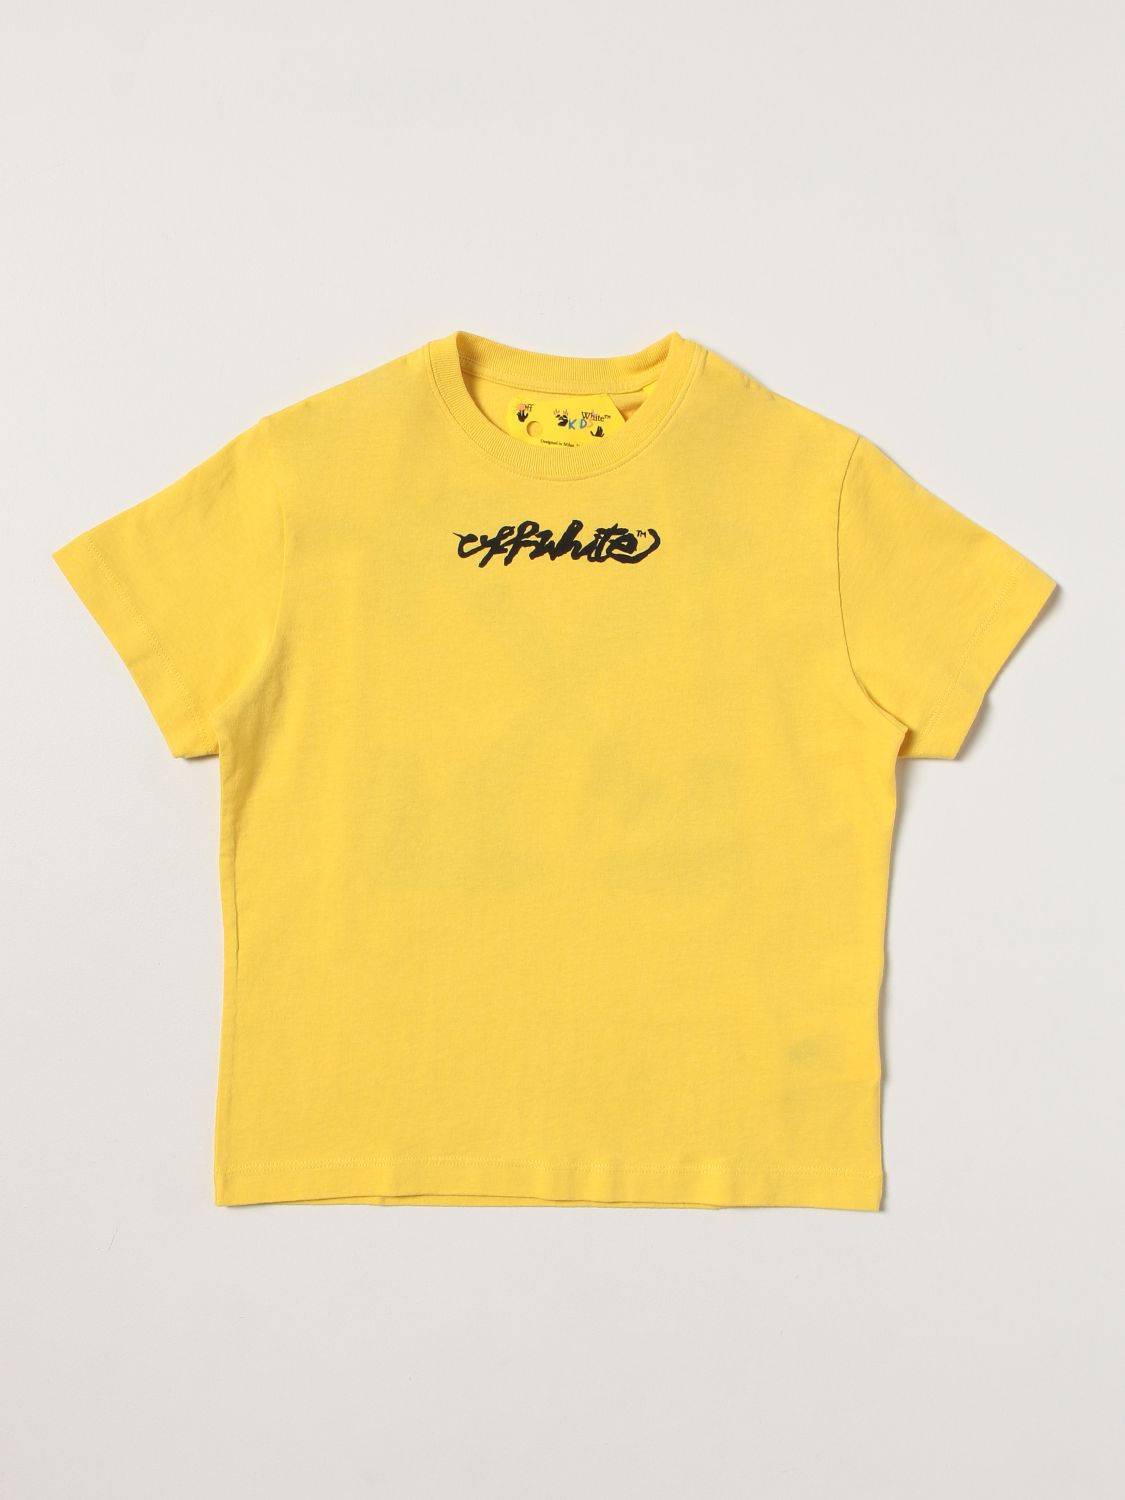 OFF-WHITE: t-shirt for girl - Yellow | Off-White t-shirt ...